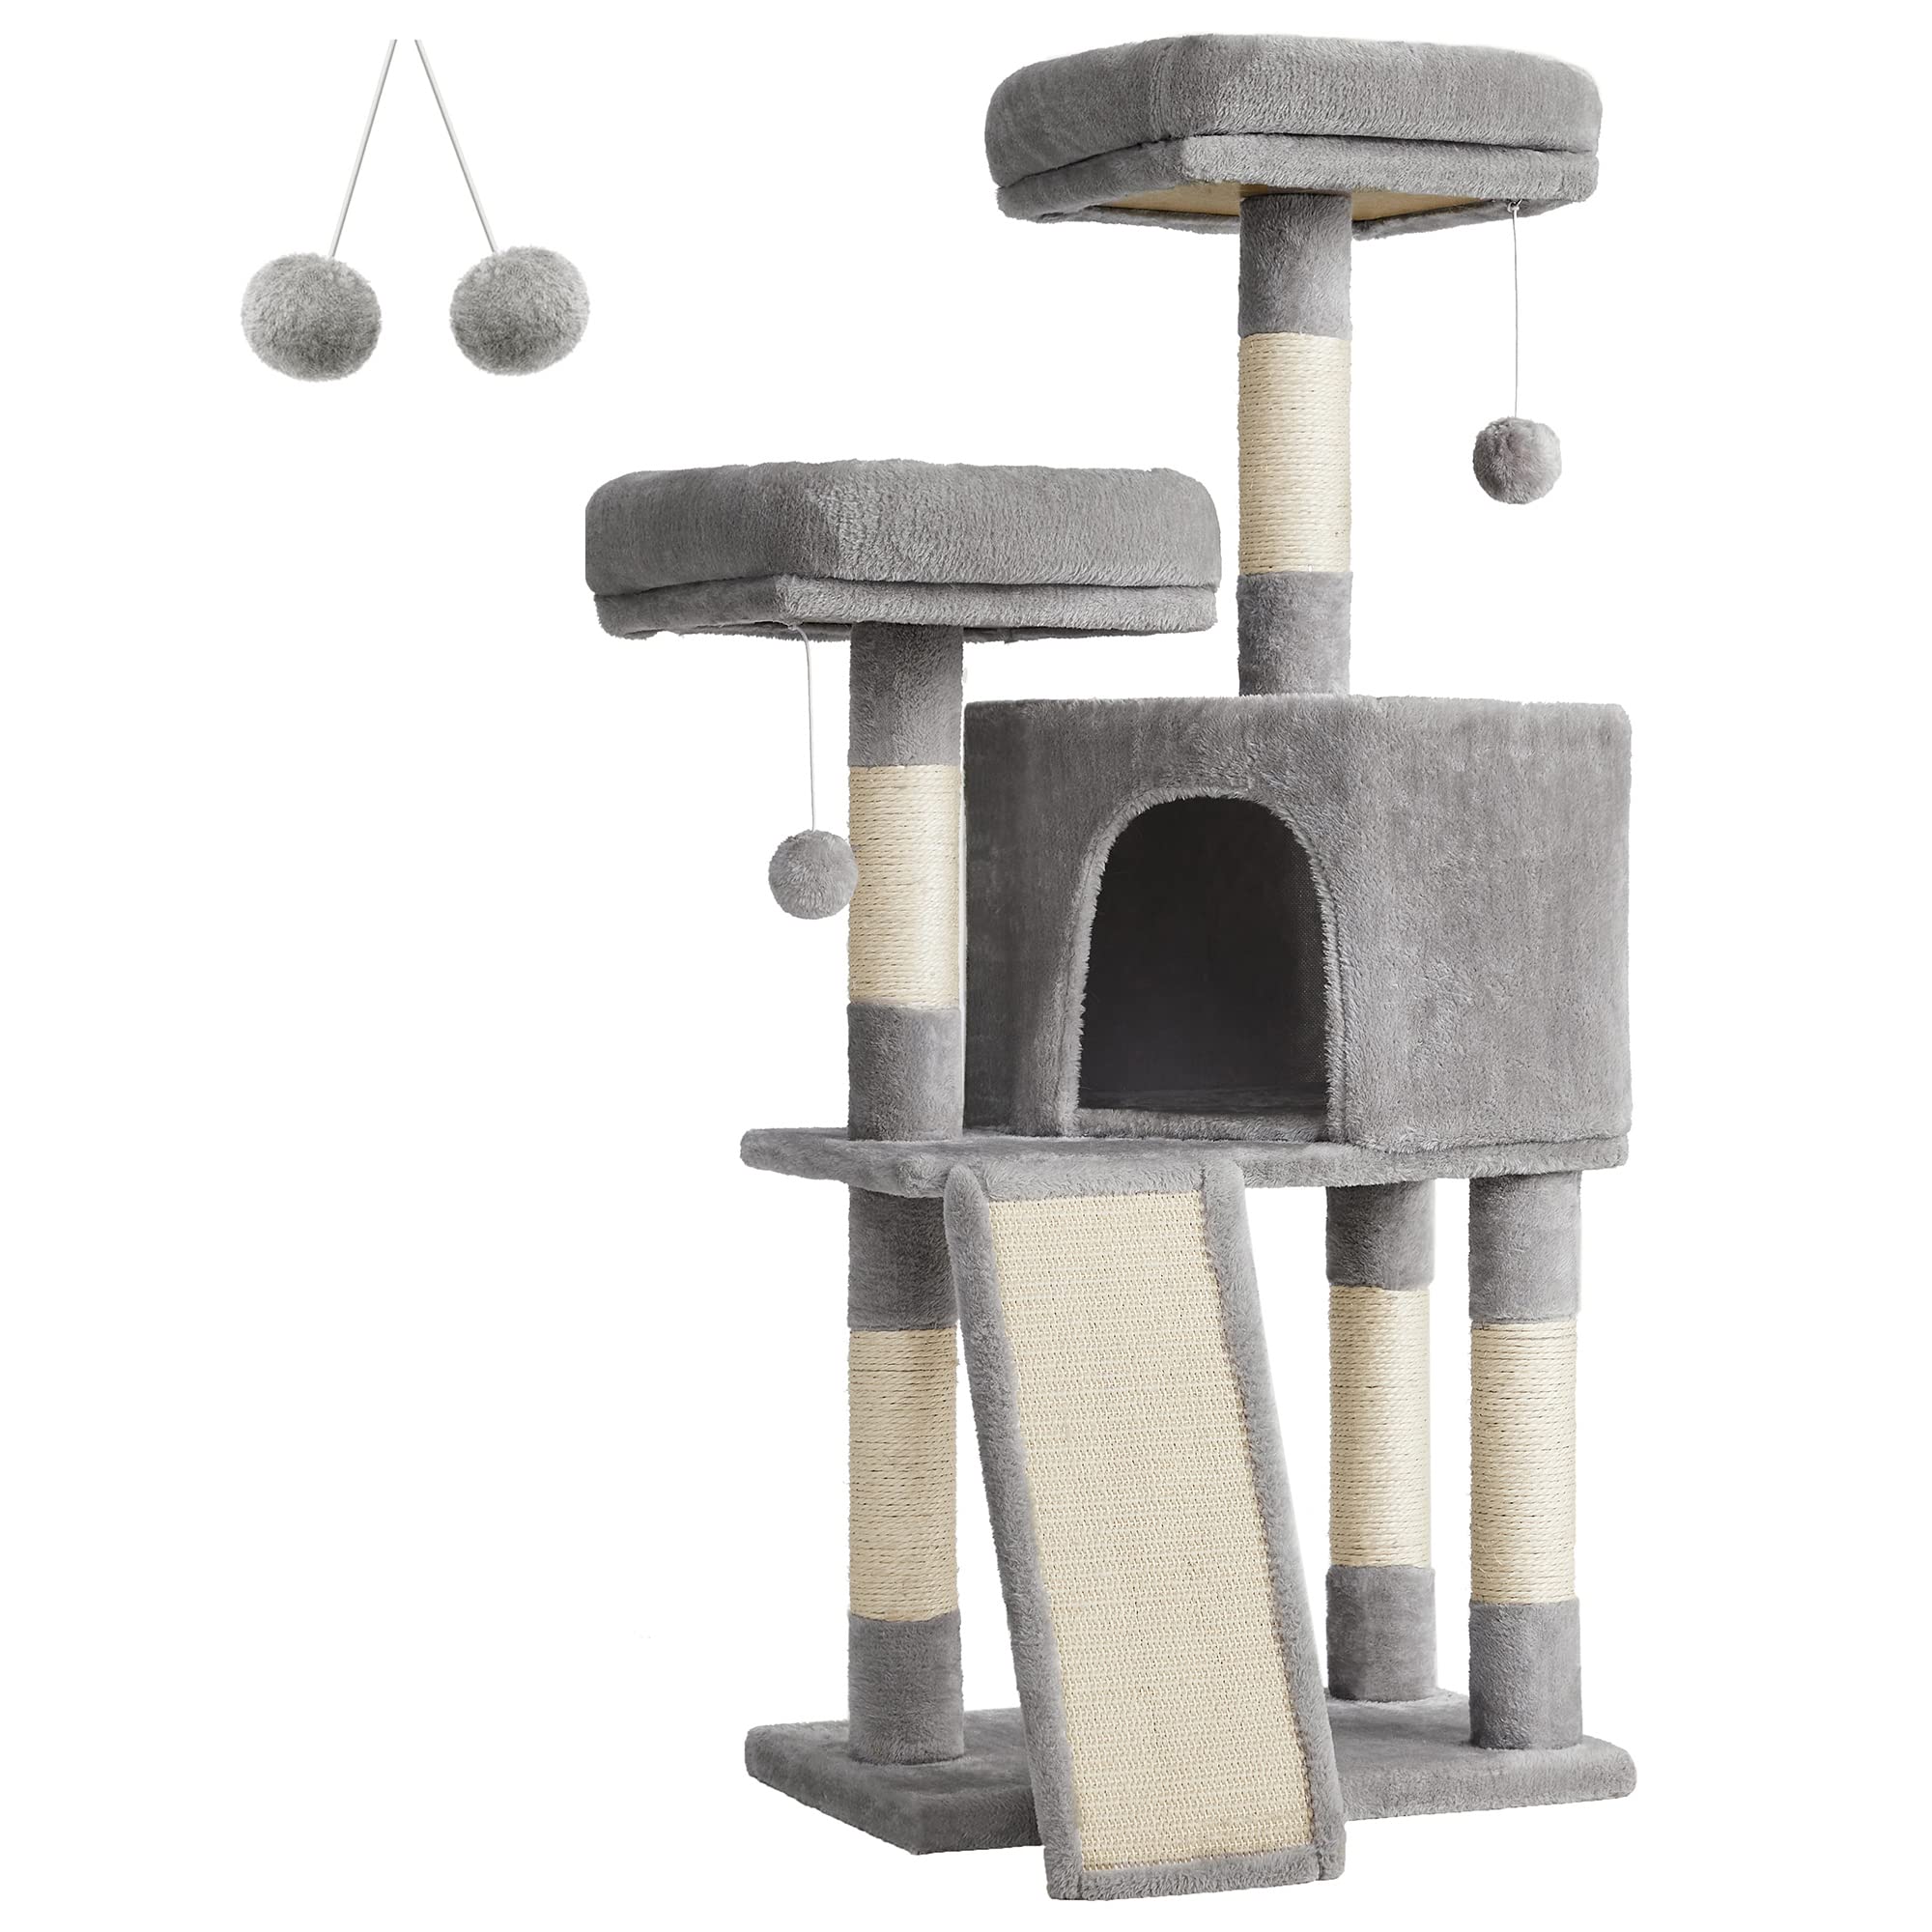 Feandrea Cat Tower, Cat Tree for Indoor Cats, 45.3-Inch Cat Condo with Scratching Post, Ramp, Perch, Spacious Cat Cave, for Kittens, Elderly Cats, Adult Cats, Small Space